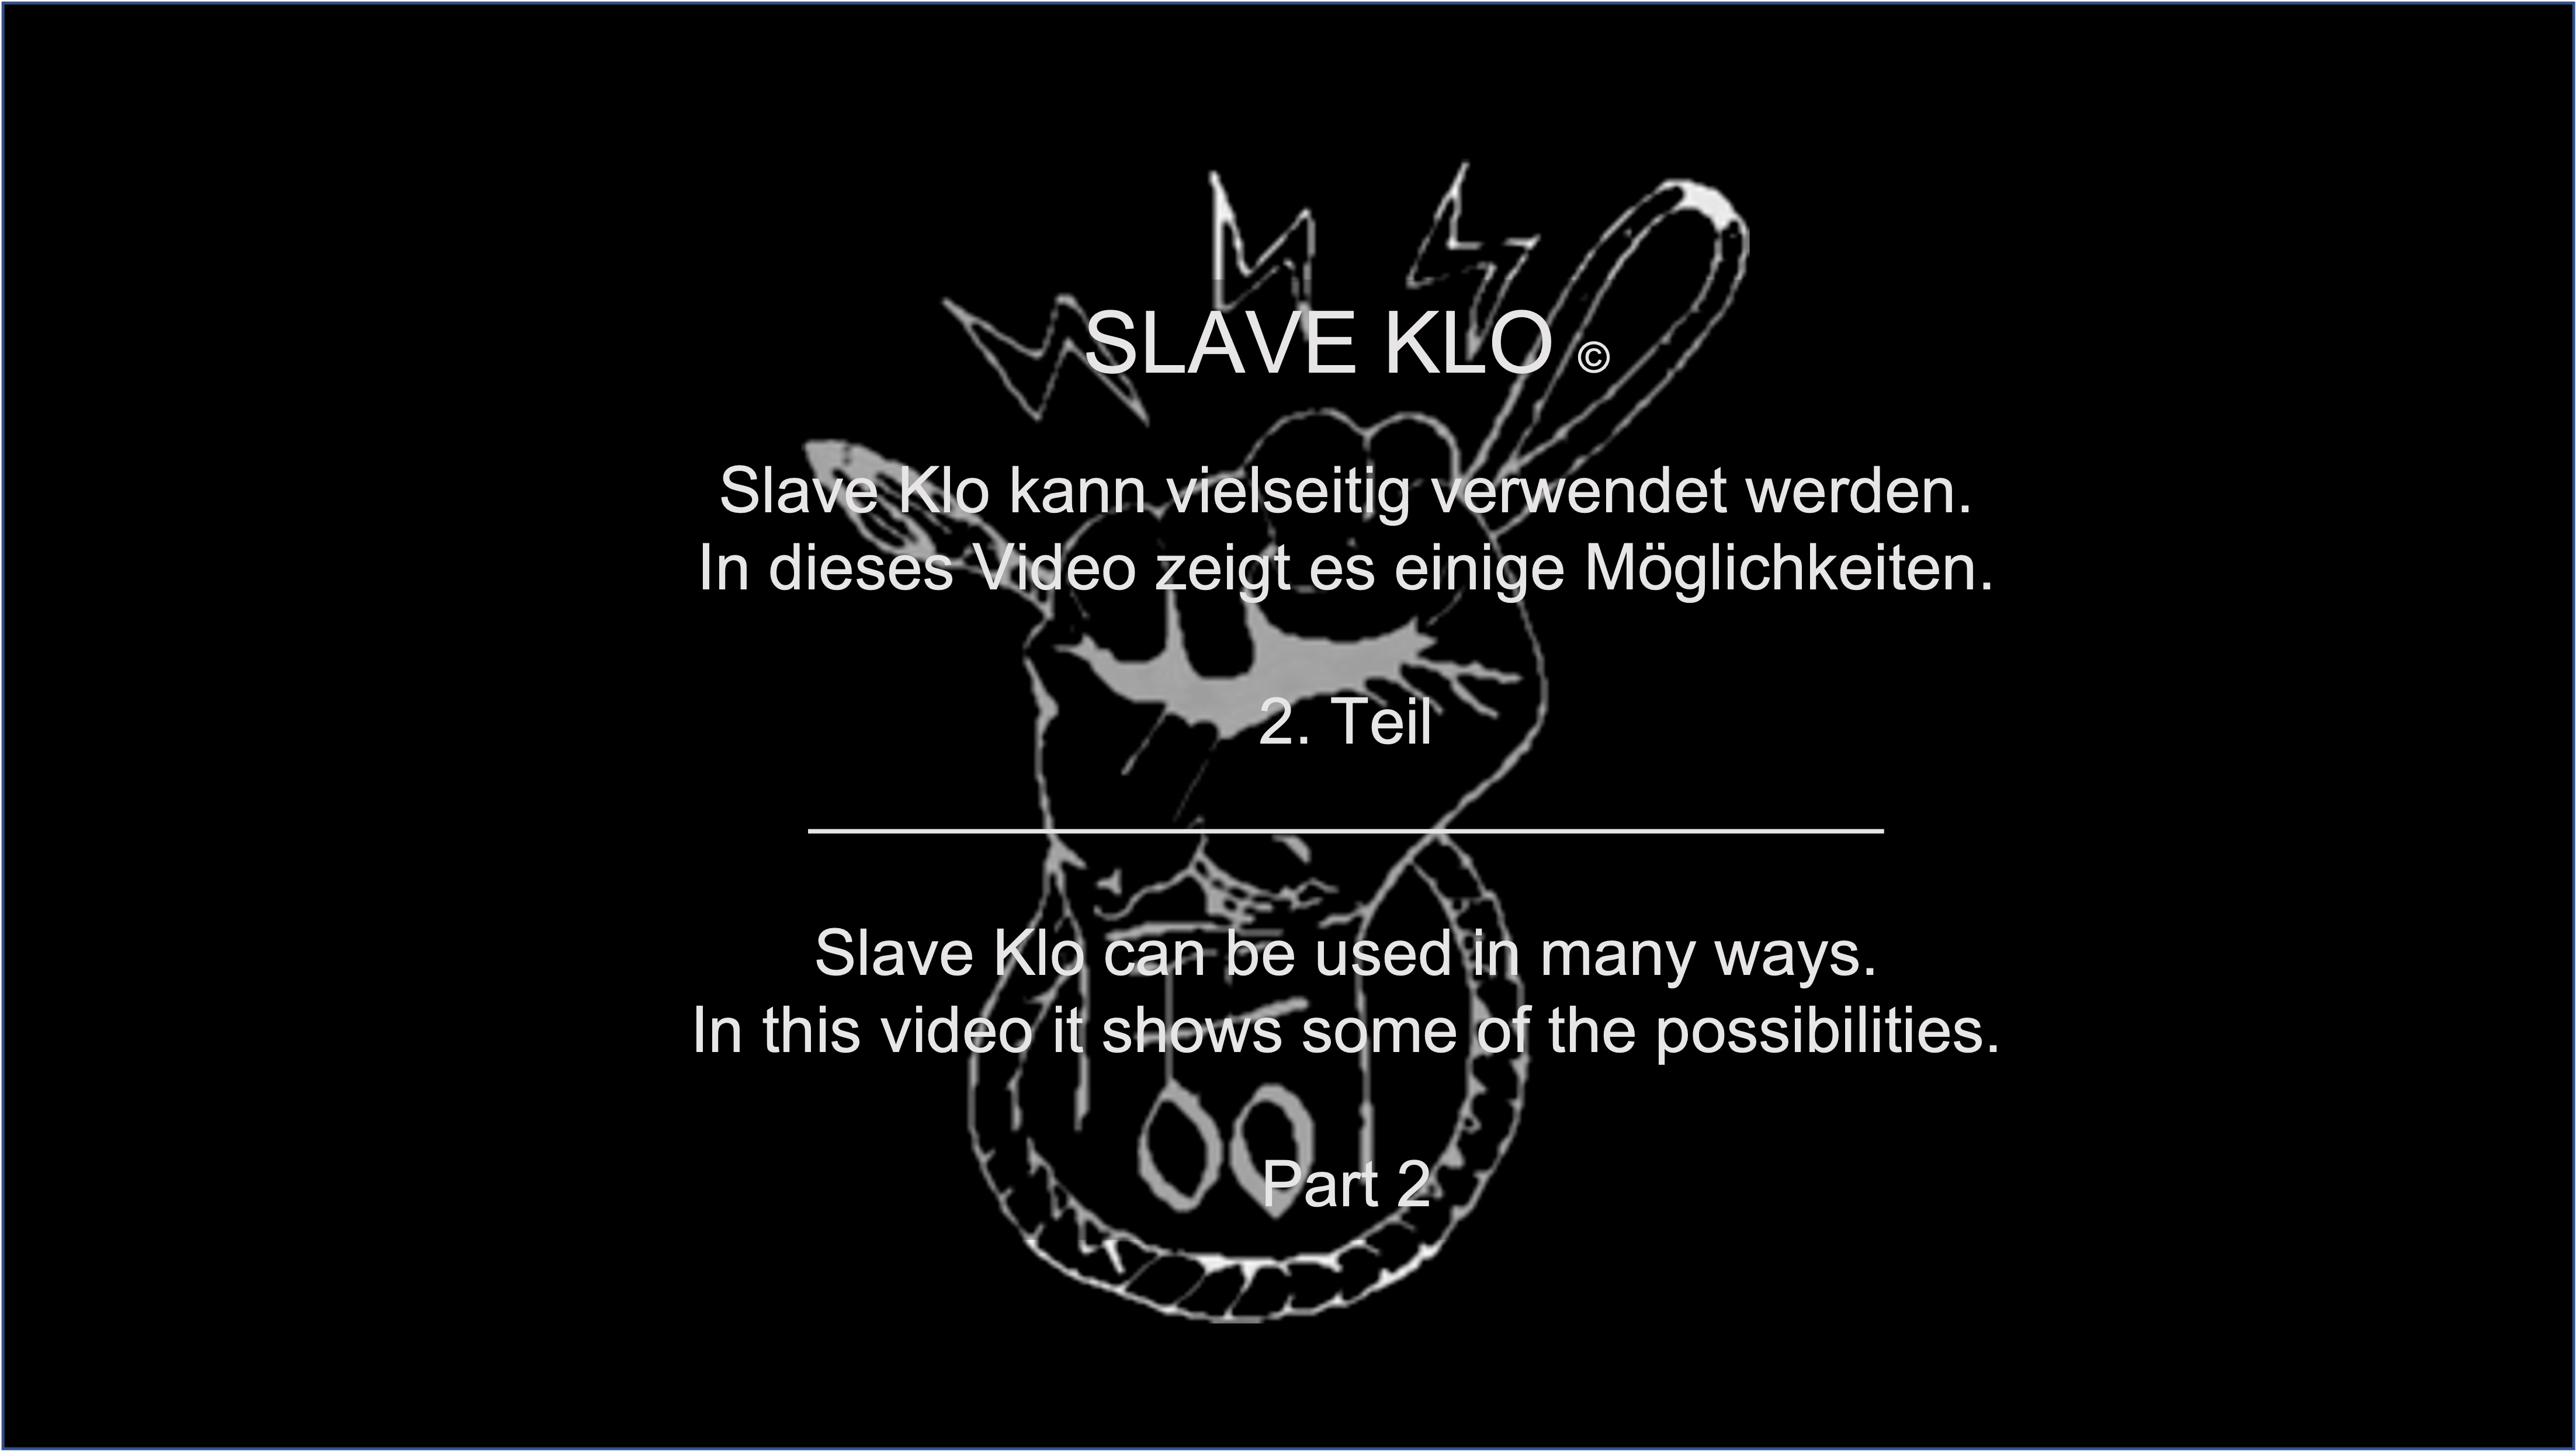 Slave Klo can be used in many ways - Part 2